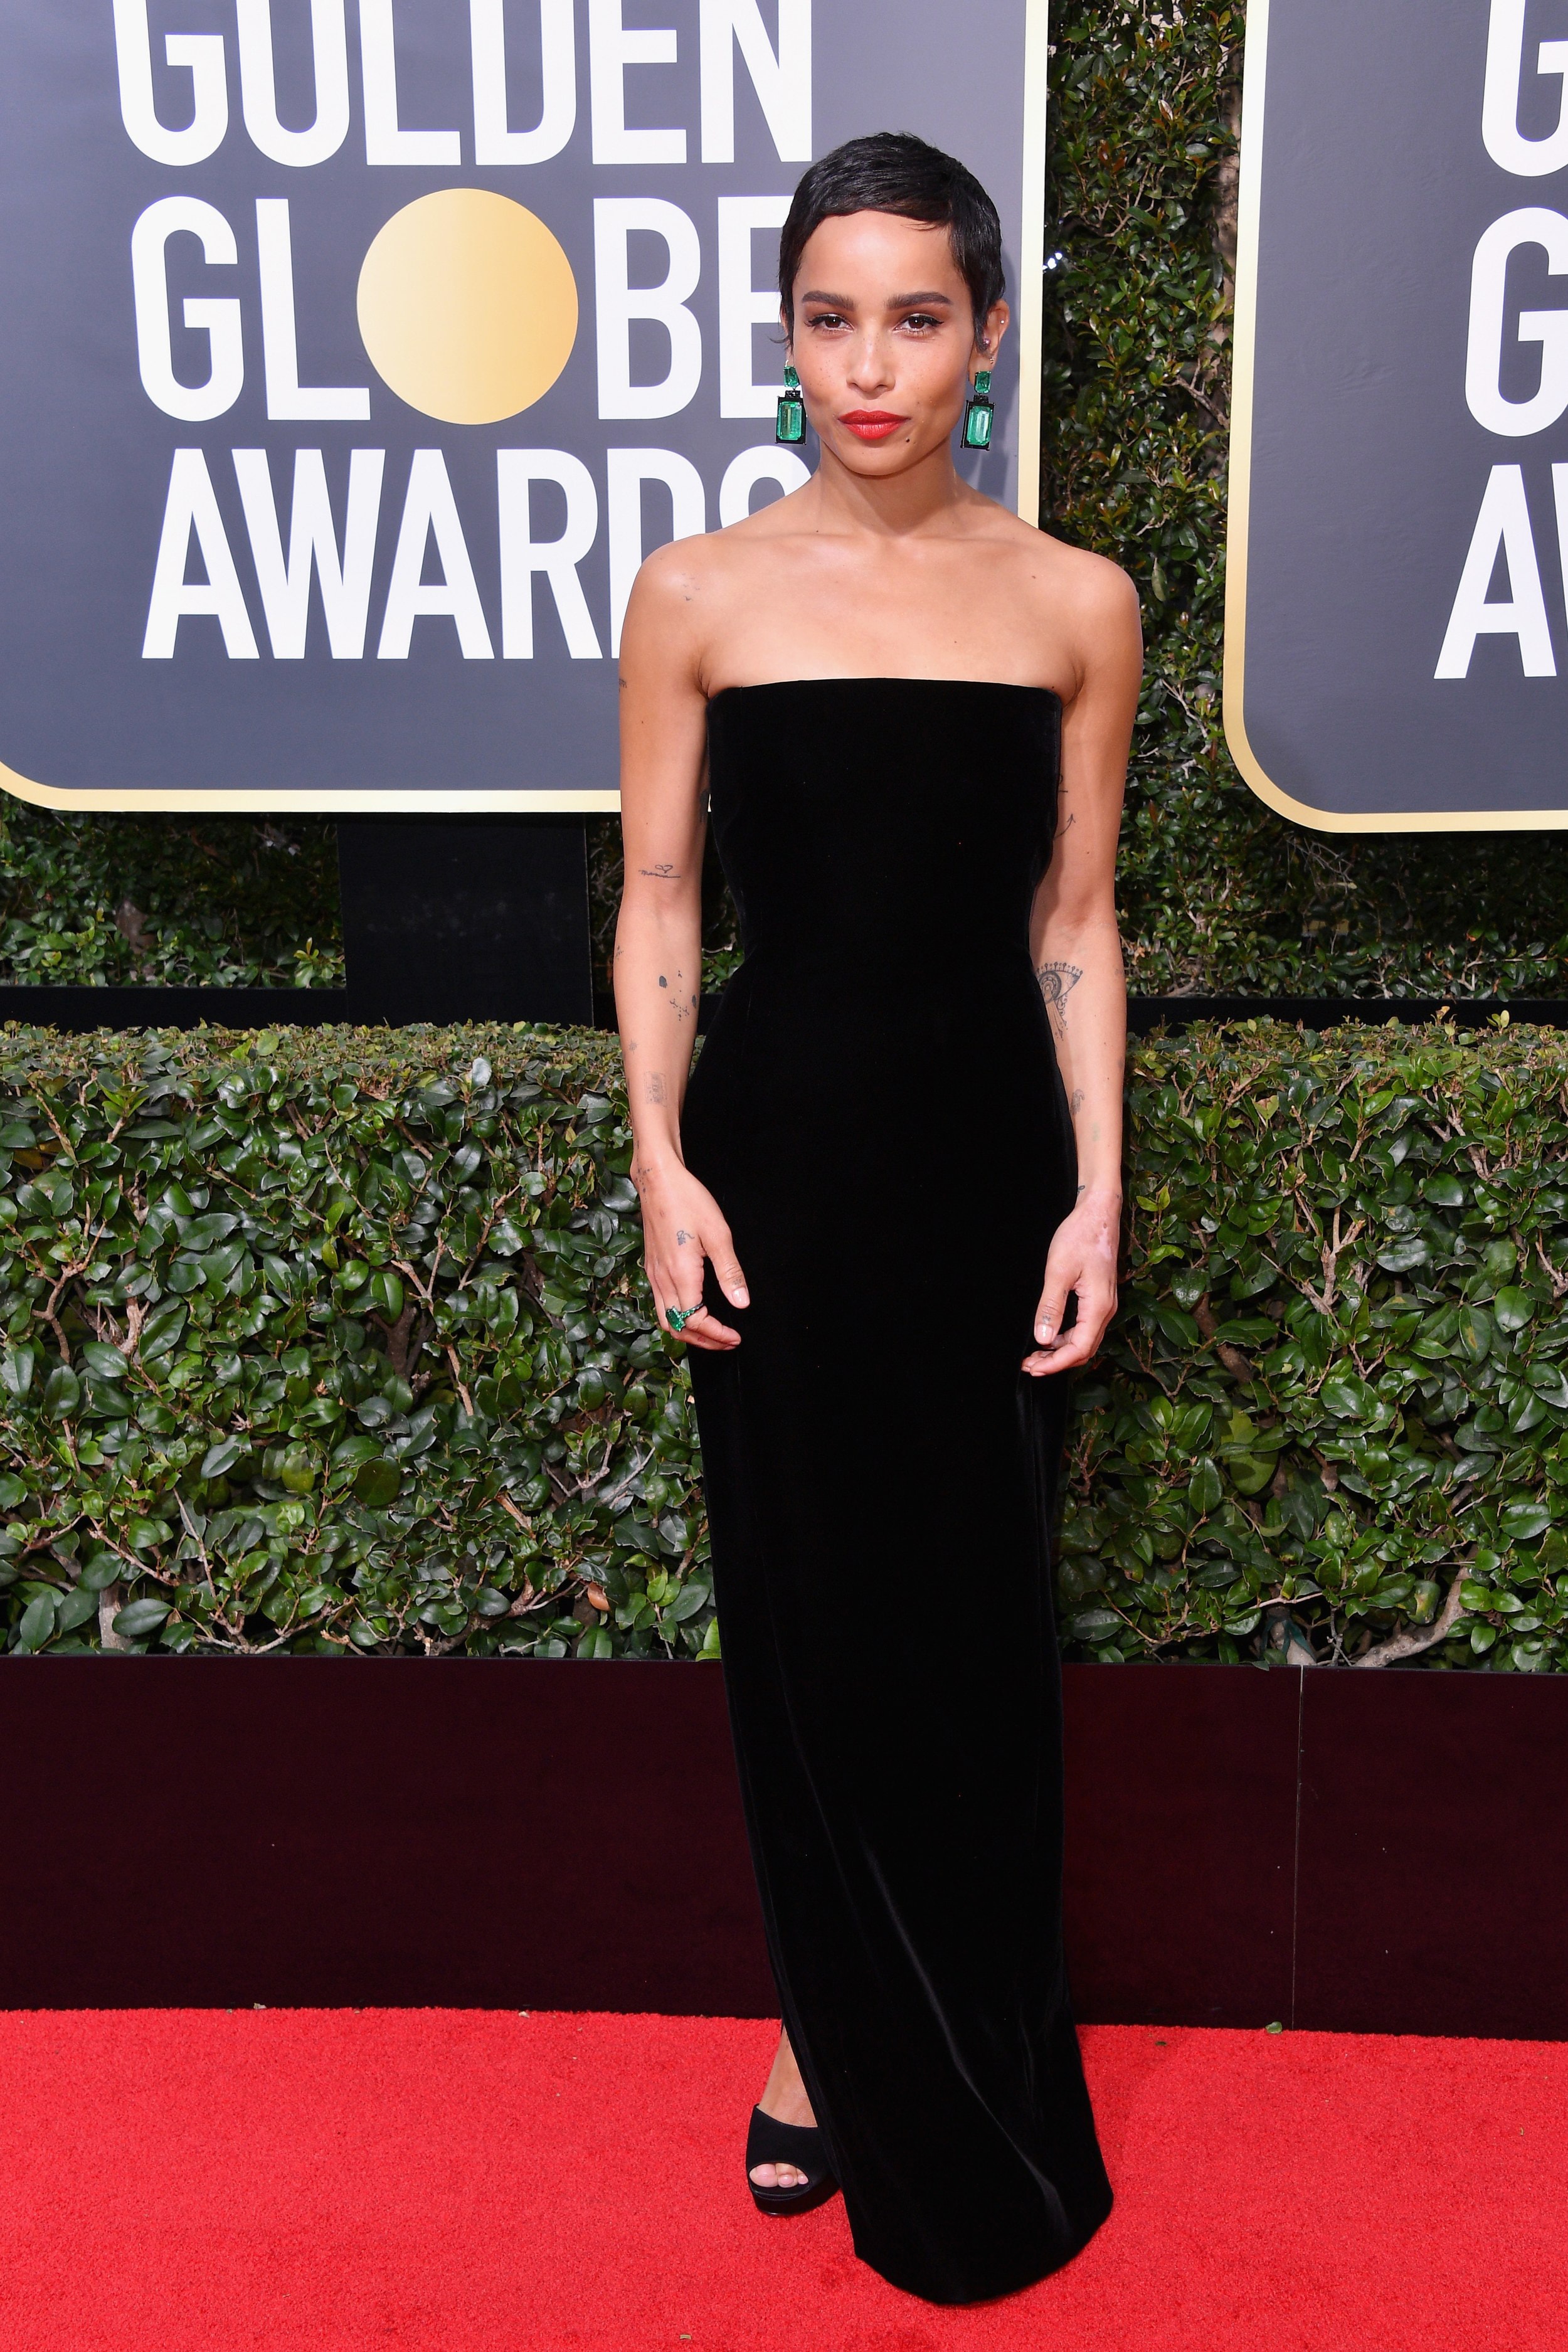 2018 Golden Globes Awards Red Carpet Looks Time's Up Movement Hollywood Entertainment Solidarity MeToo Sexual Assault Initiative Actresses Kendall Jenner Millie Bobby Brown Zoe Kravitz Reese Witherspoon Alicia Wikander